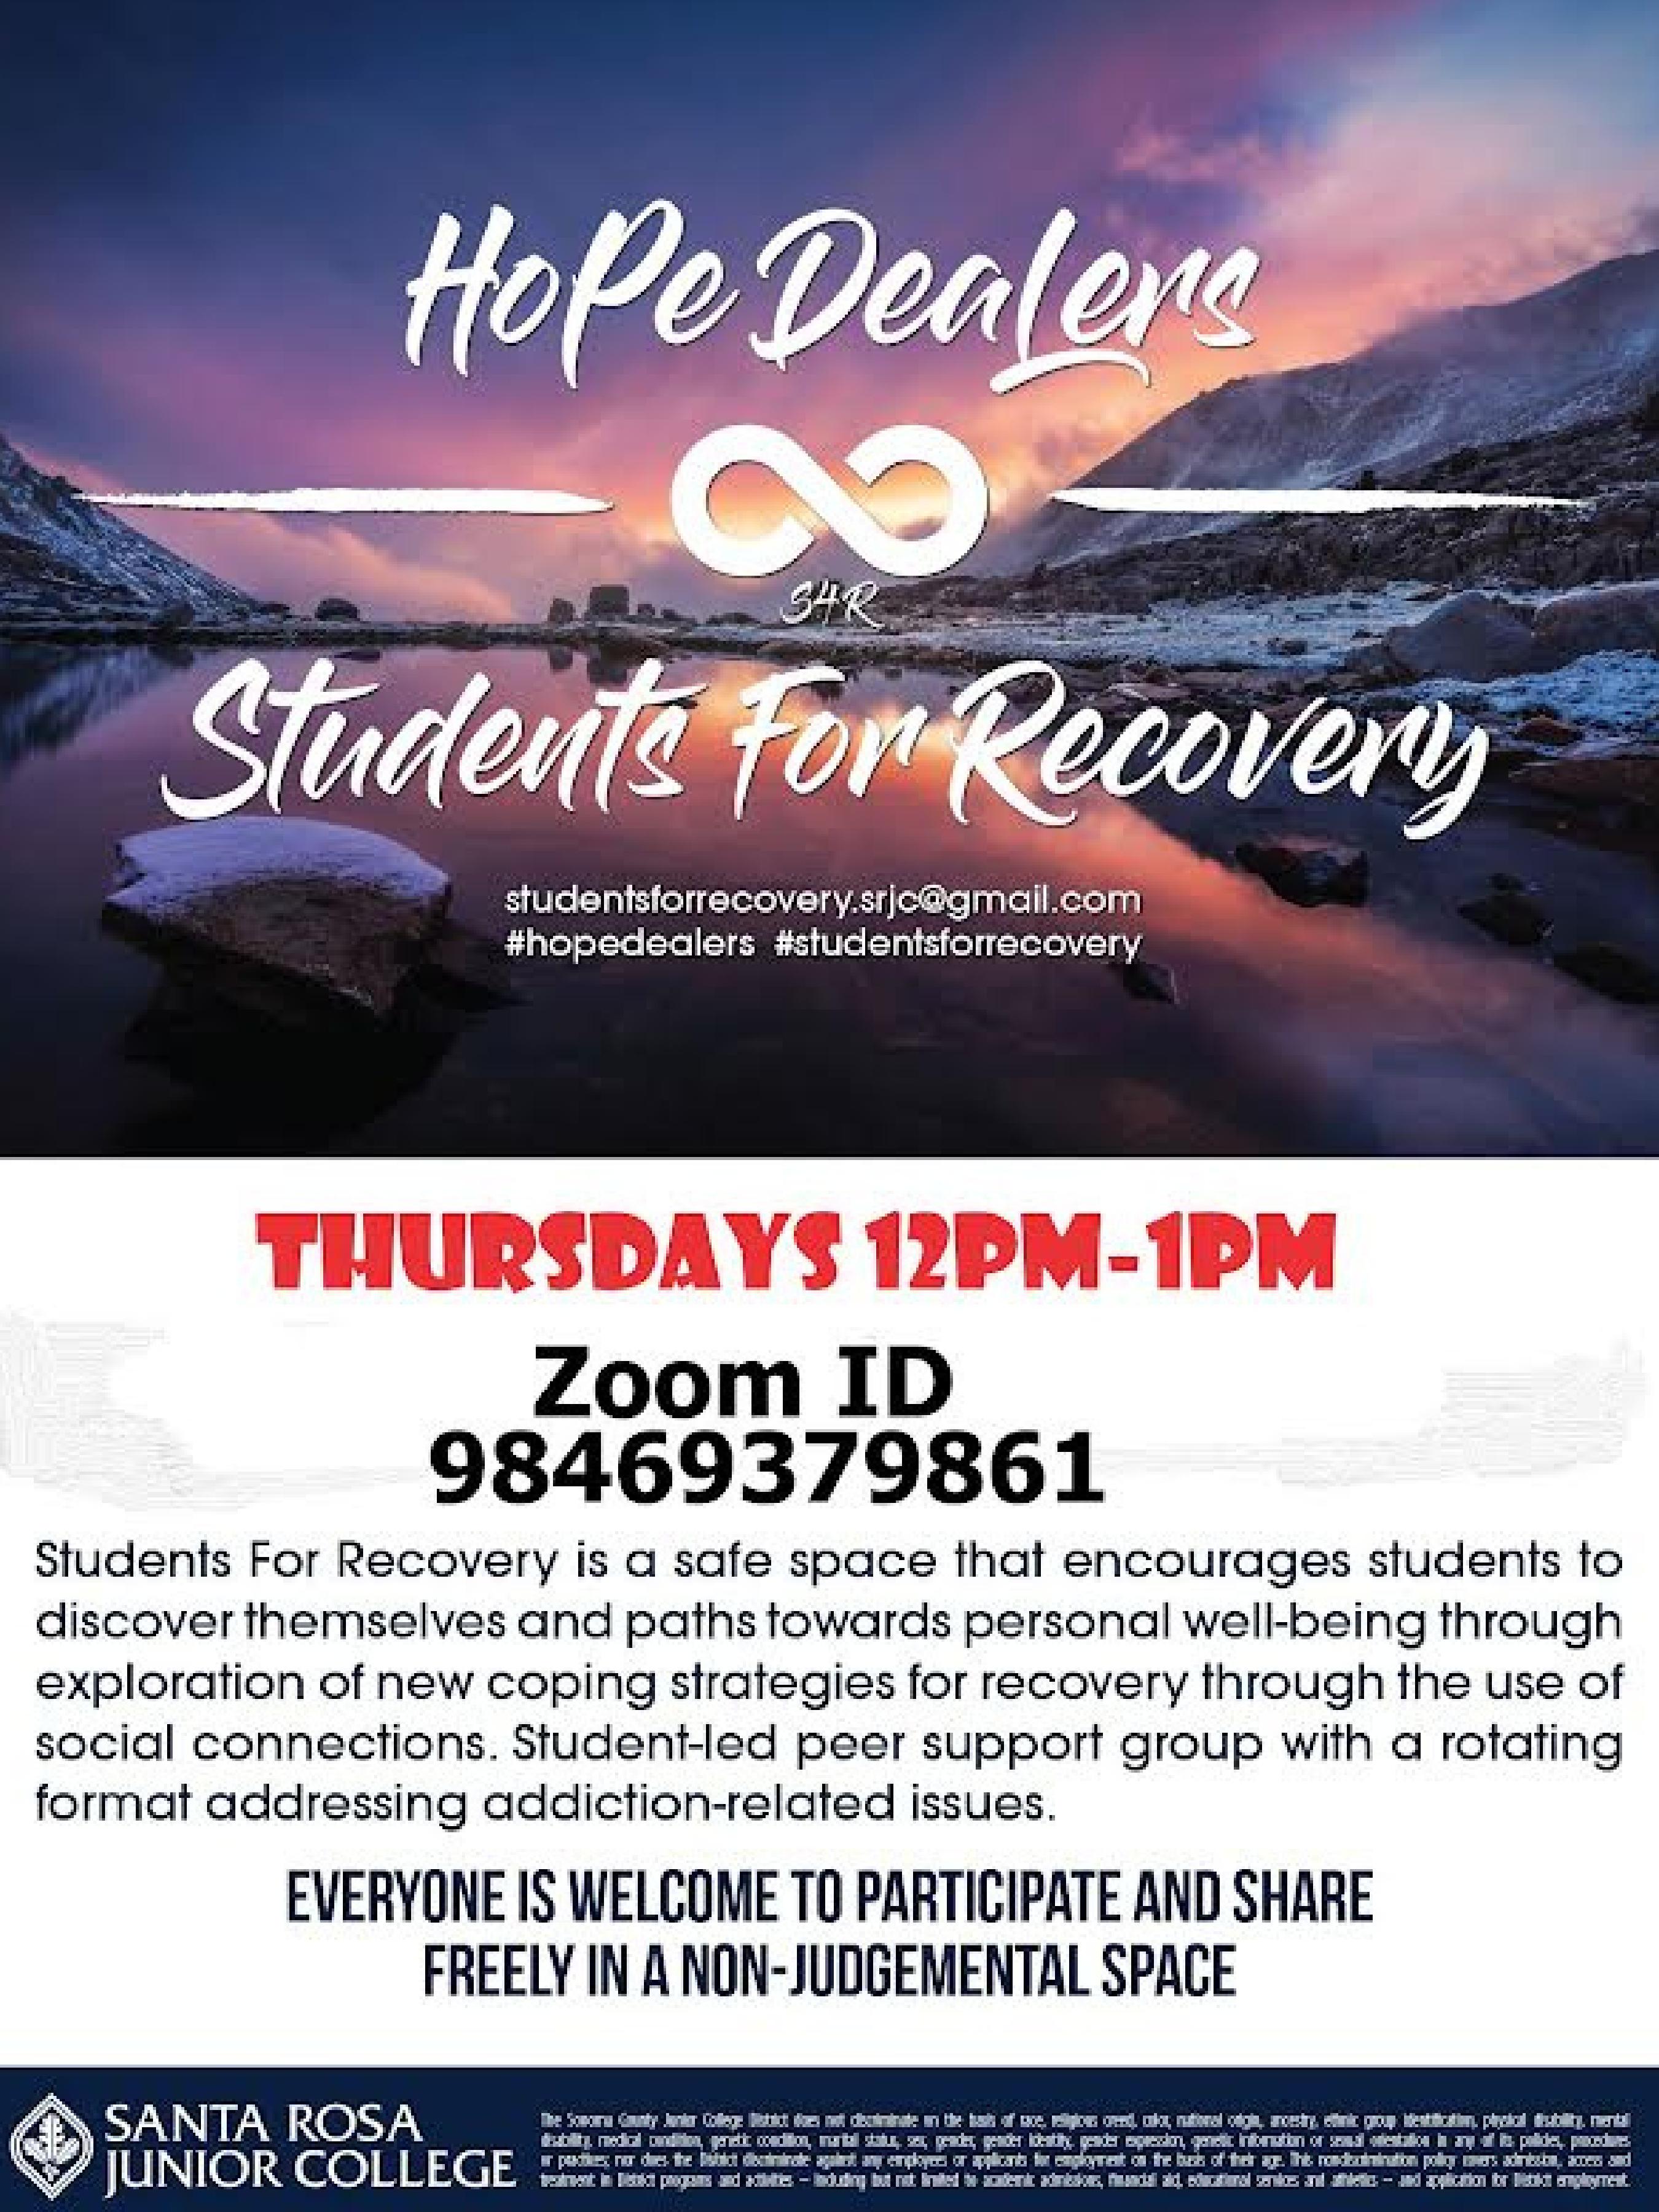 Students for Recovery is a safe space for students to support each other and discover healthy connections. Thursdays from 12 to 1 PM. Zoom ID: https://santarosa-edu.zoom.us/j/98469379861#success